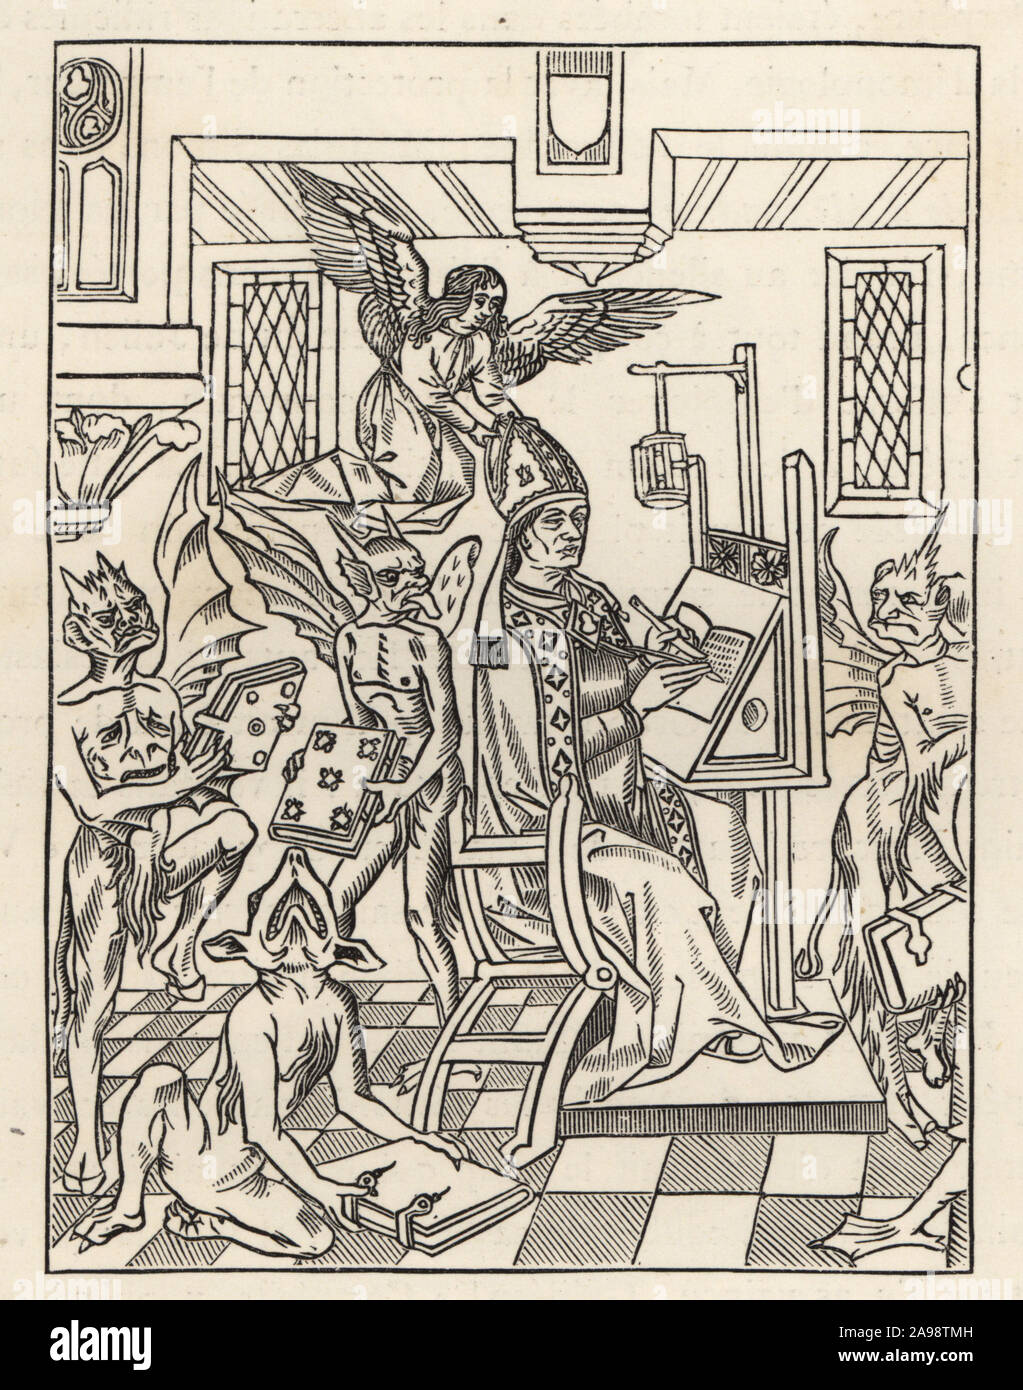 Allegorical illustration of Bonifacio Simonetta aided by an angel surrounded by the dogs and demons of heresy. Orthodoxy surrounded by the pitfalls of Heresy. Woodcut from Livre des persecutions des crestiens. L’Orthodoxie entouree des embuches de l’Heresie. Woodcut from Paul Lacroix’s La Vie Militaire et Religieuse au Moyen Age et a l’Epoque de la Renaissance, Military and Religious Life in the Middle Ages and the Renaissance, Paris, 1873. Stock Photo